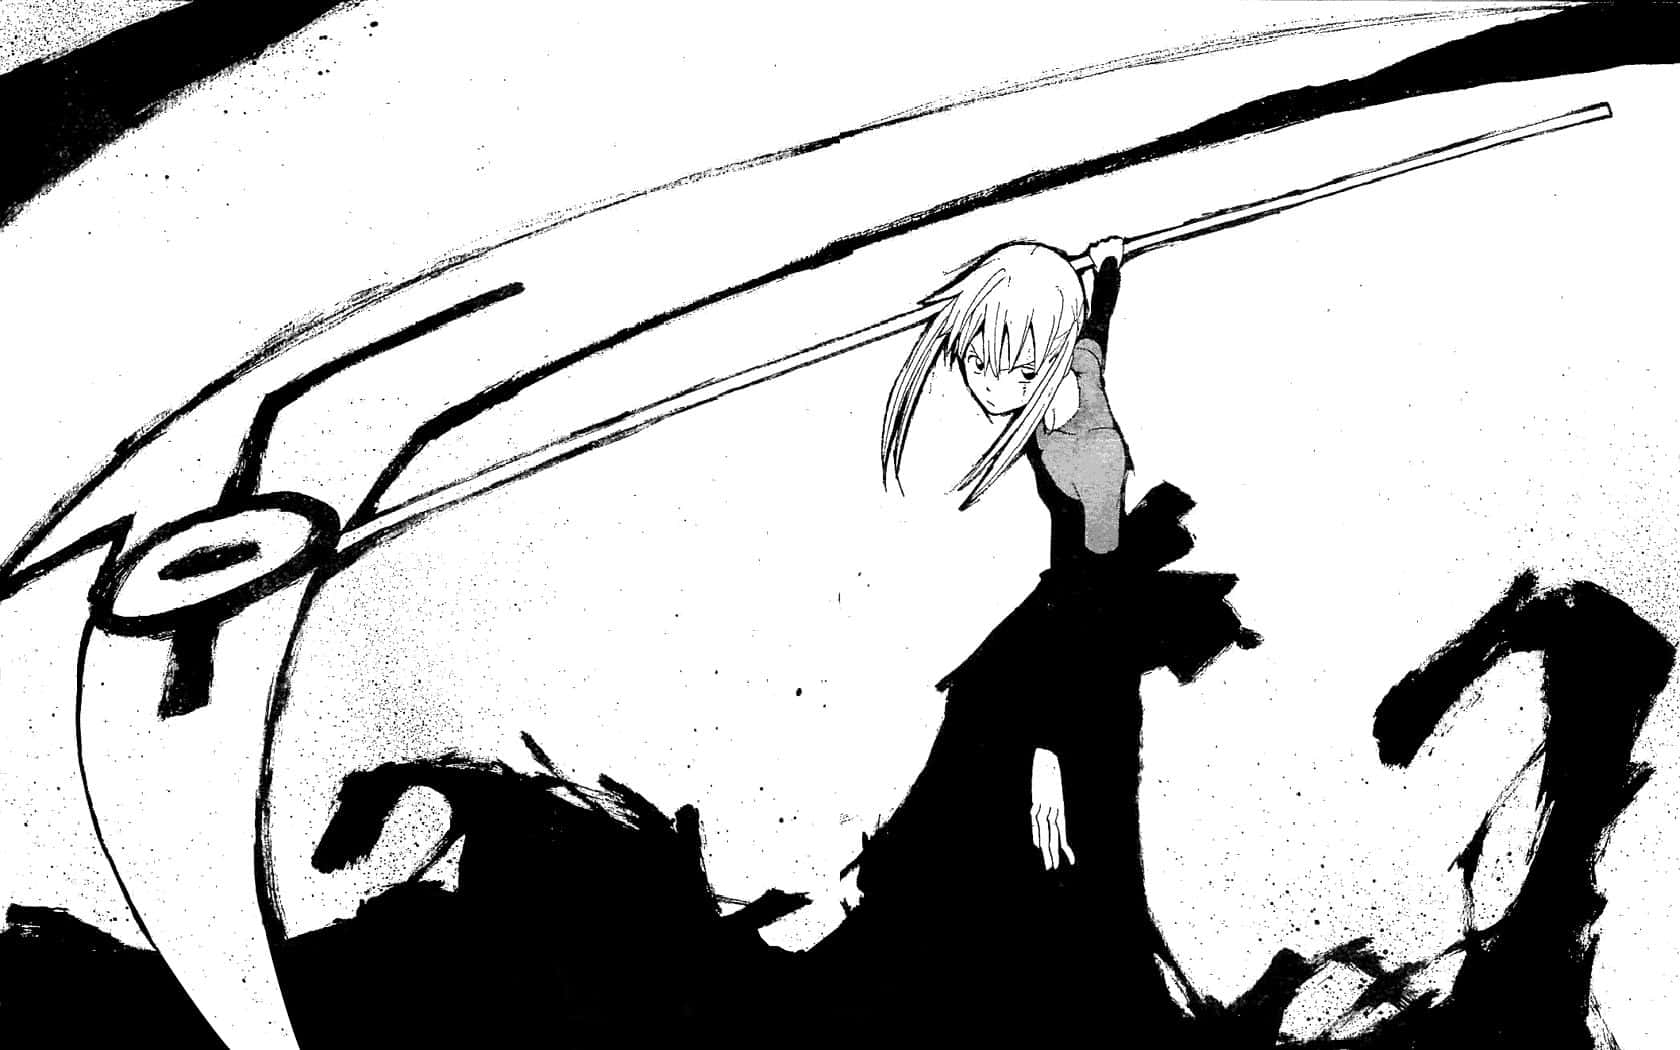 Get ready to join Maka and Soul in a thrilling adventure through the world of Soul Eater! Wallpaper